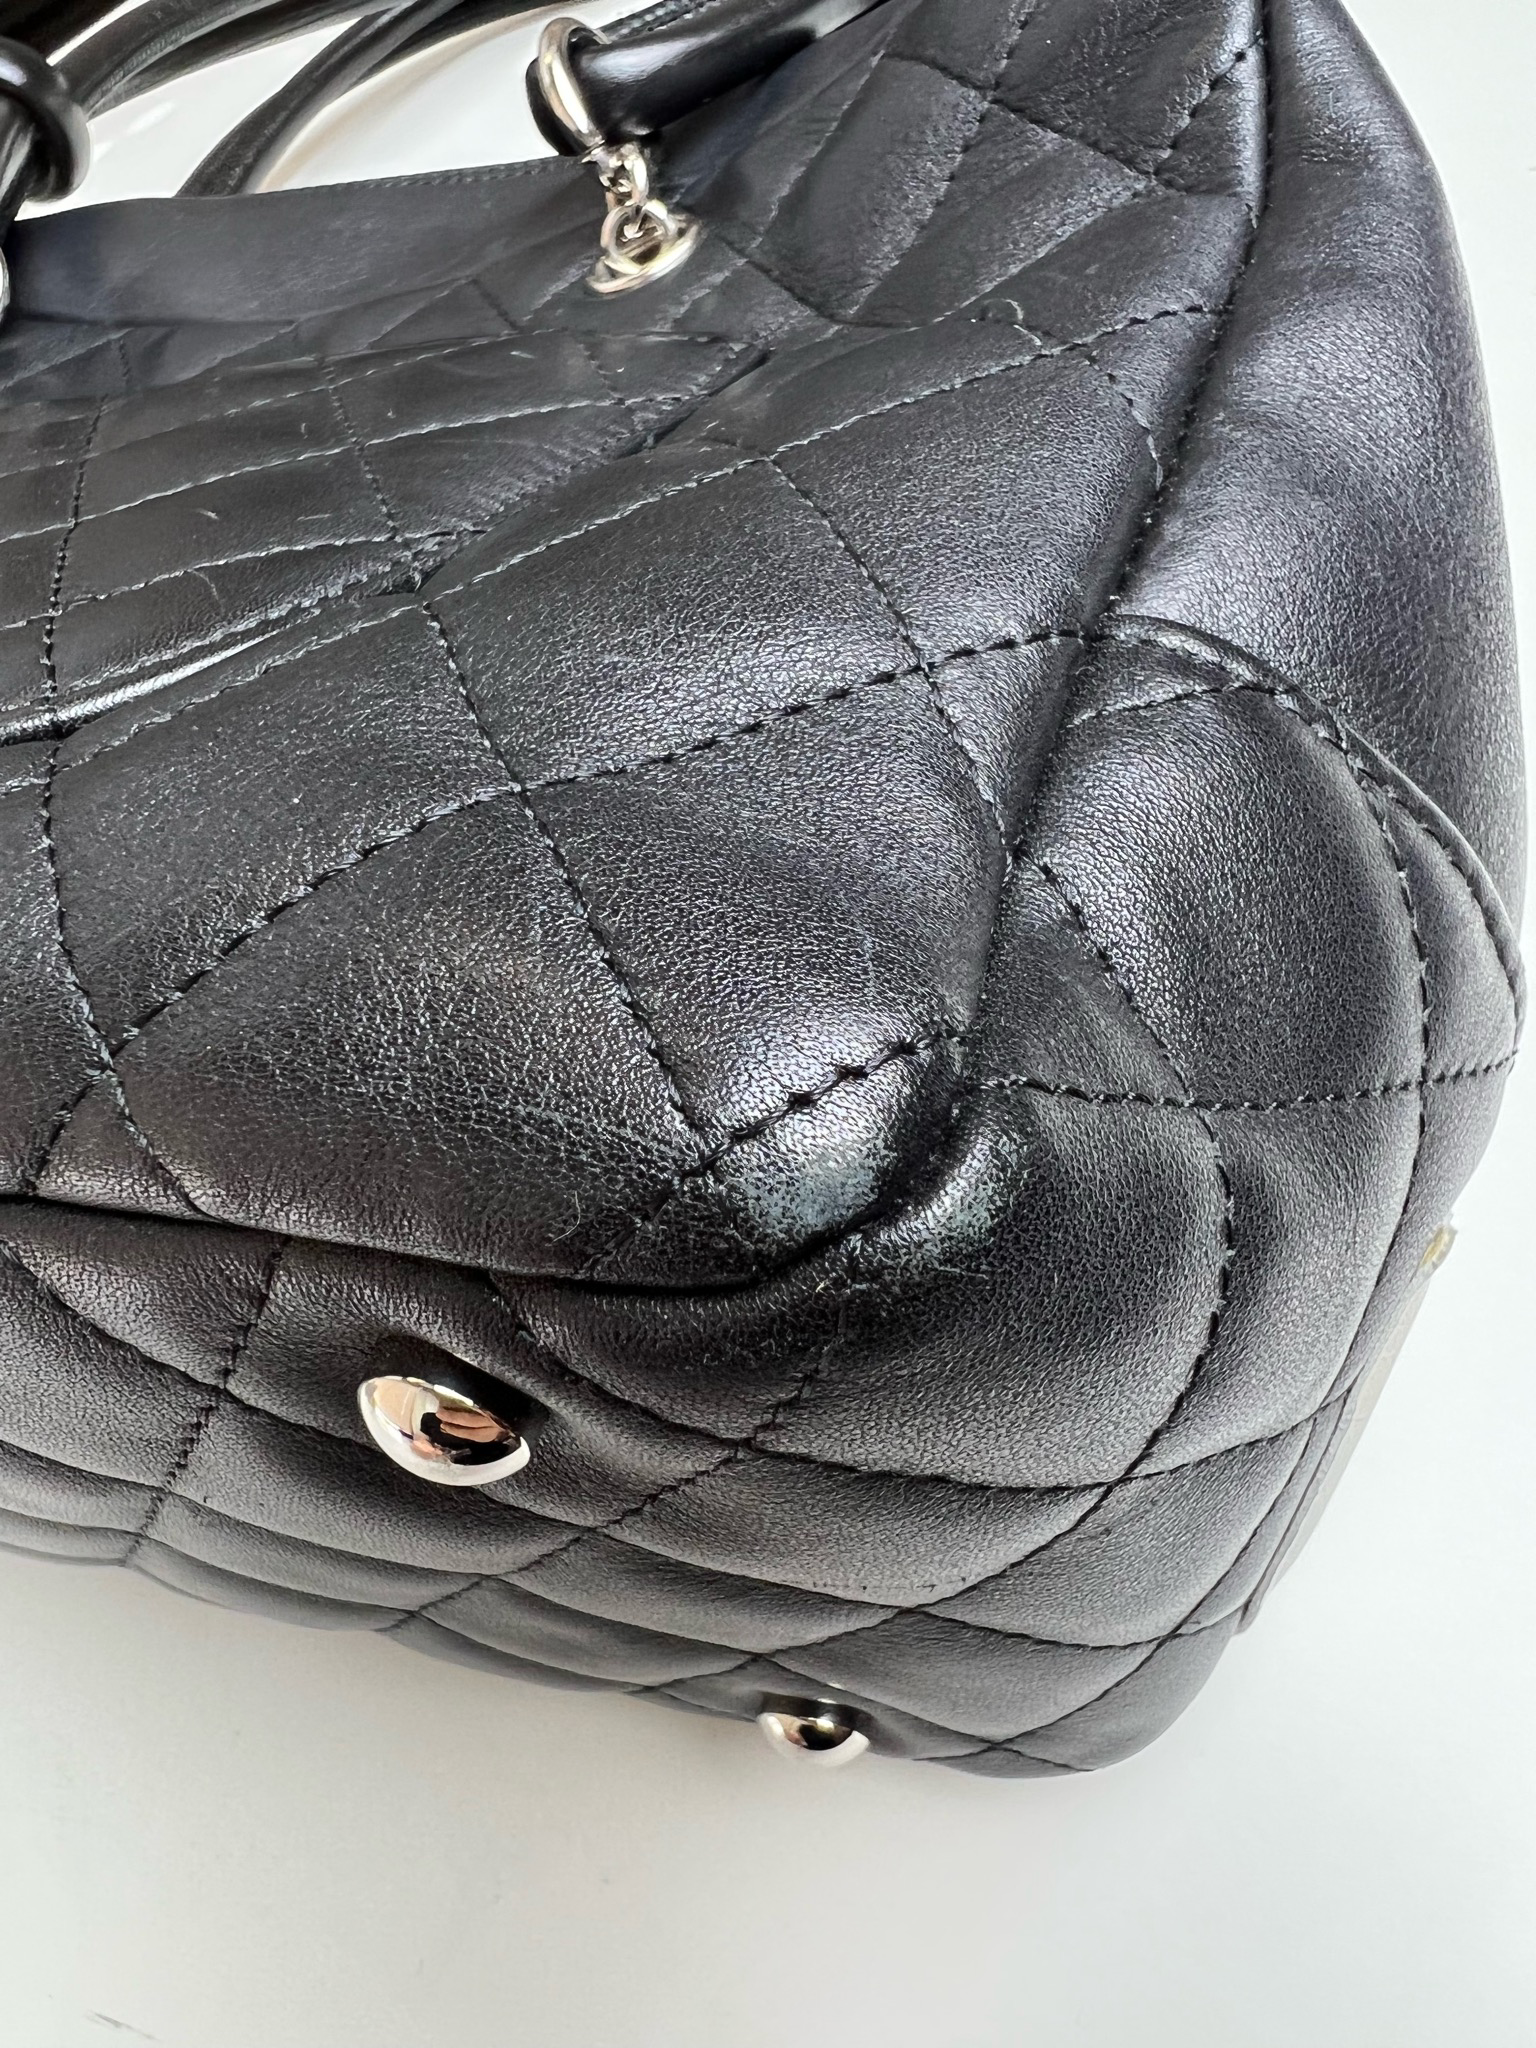 Chanel Cambon Bowler Bag, Black and White, Preowned in Dustbag WA001